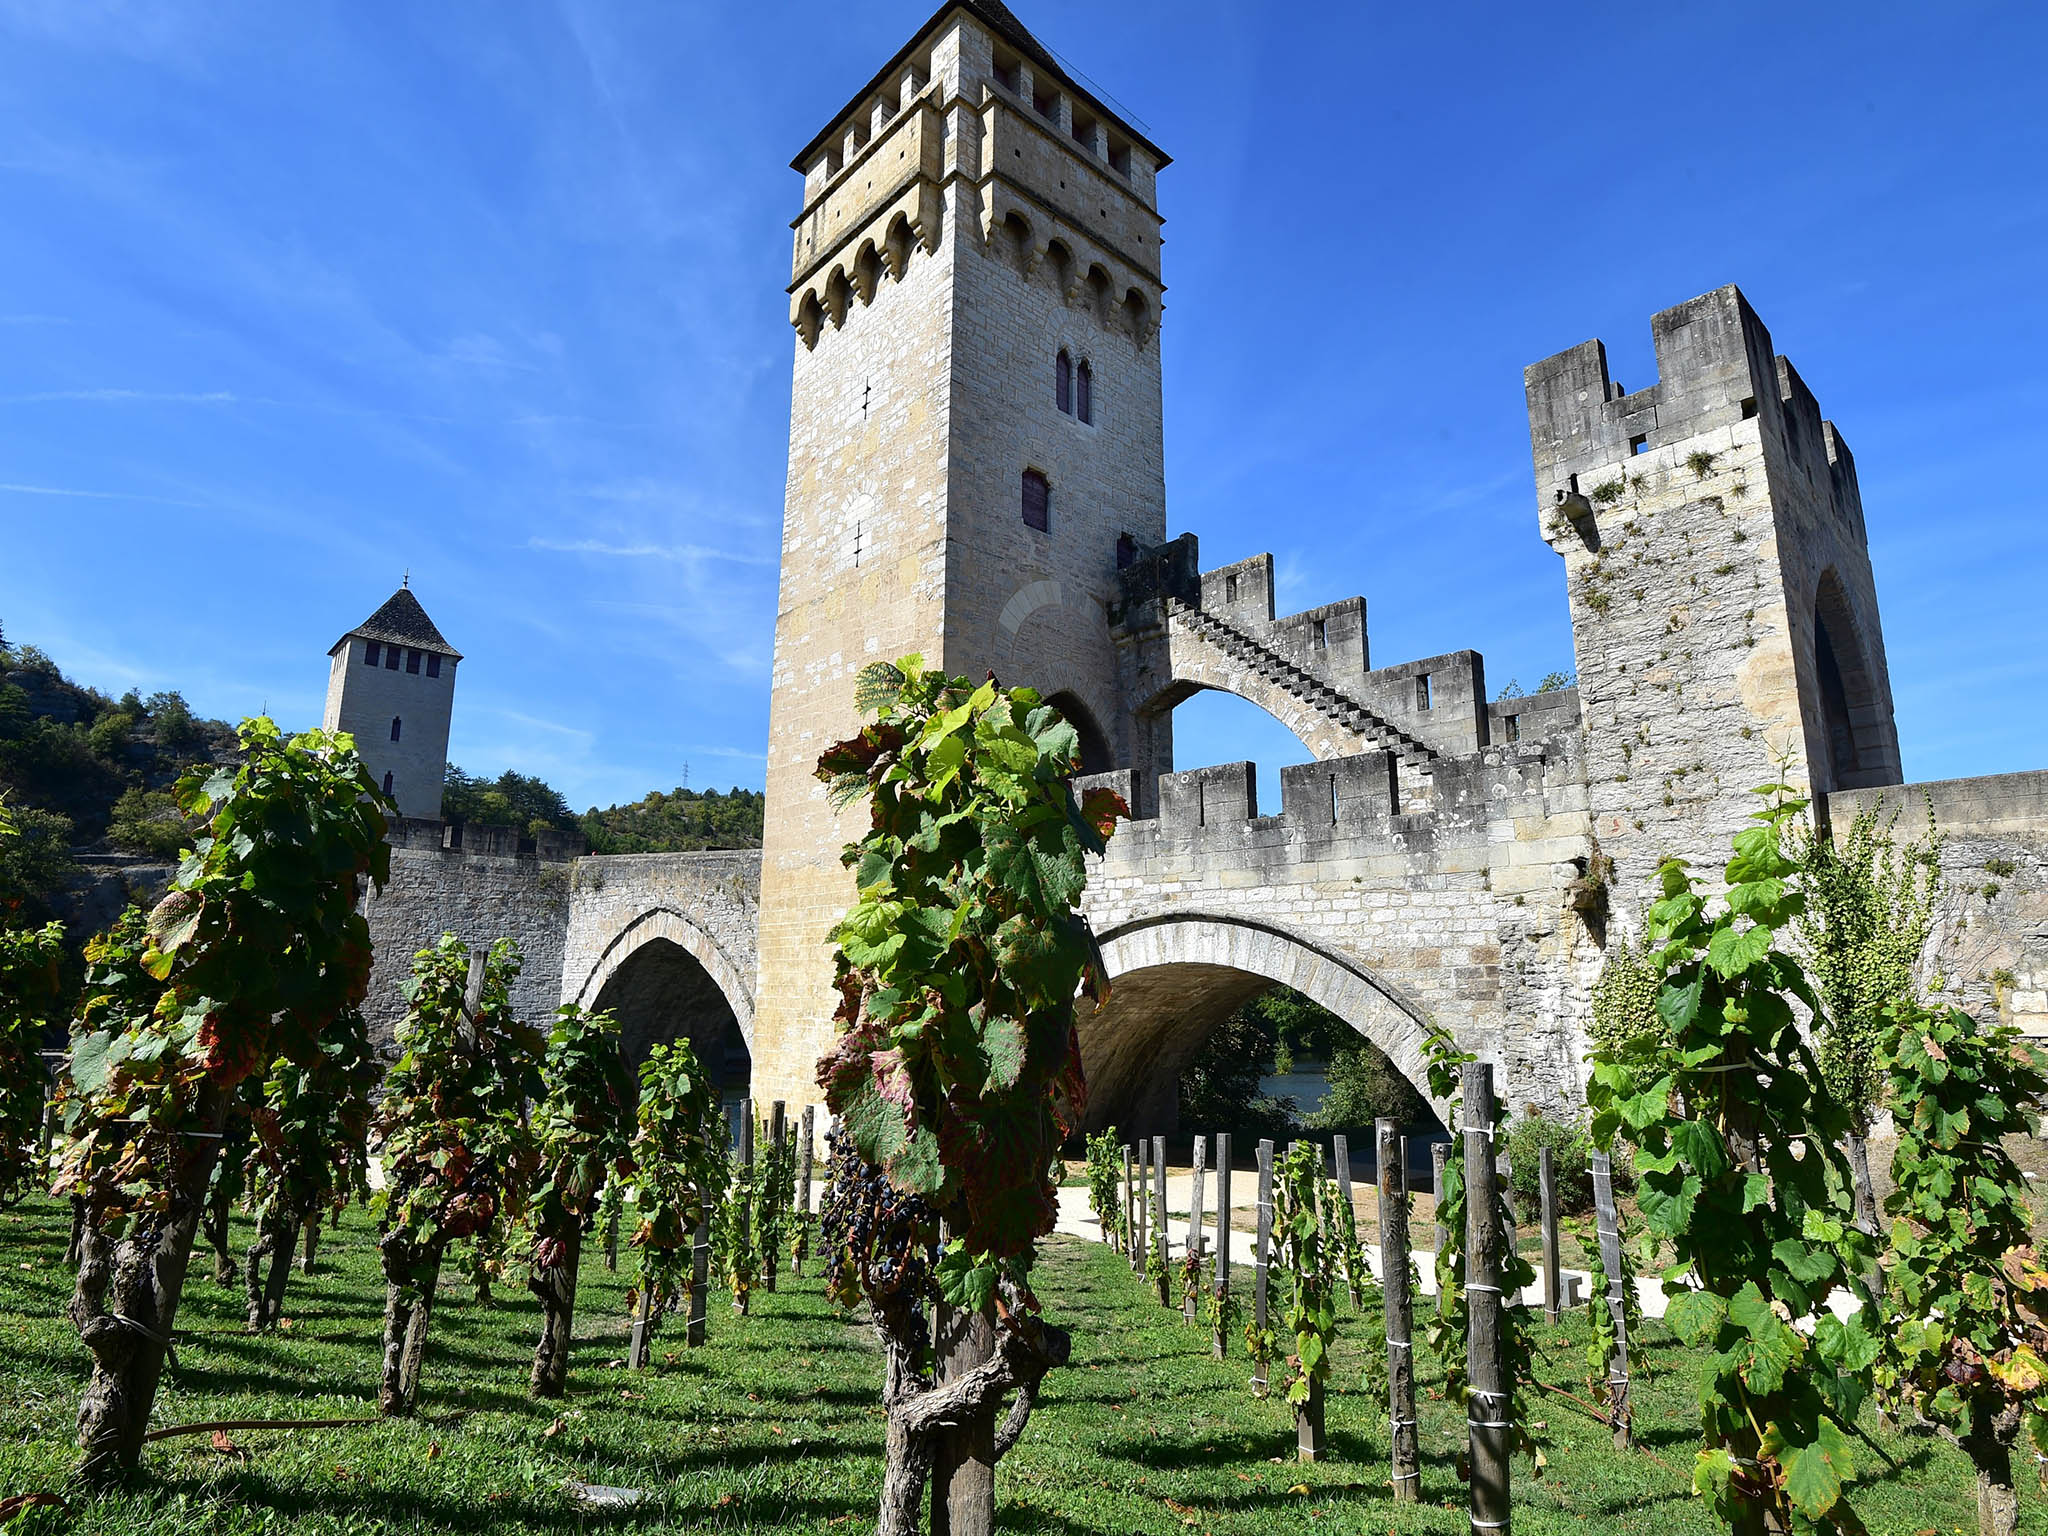 ‘Cahors is the region, the terroir, the people. We’re not malbec, not Argentina’